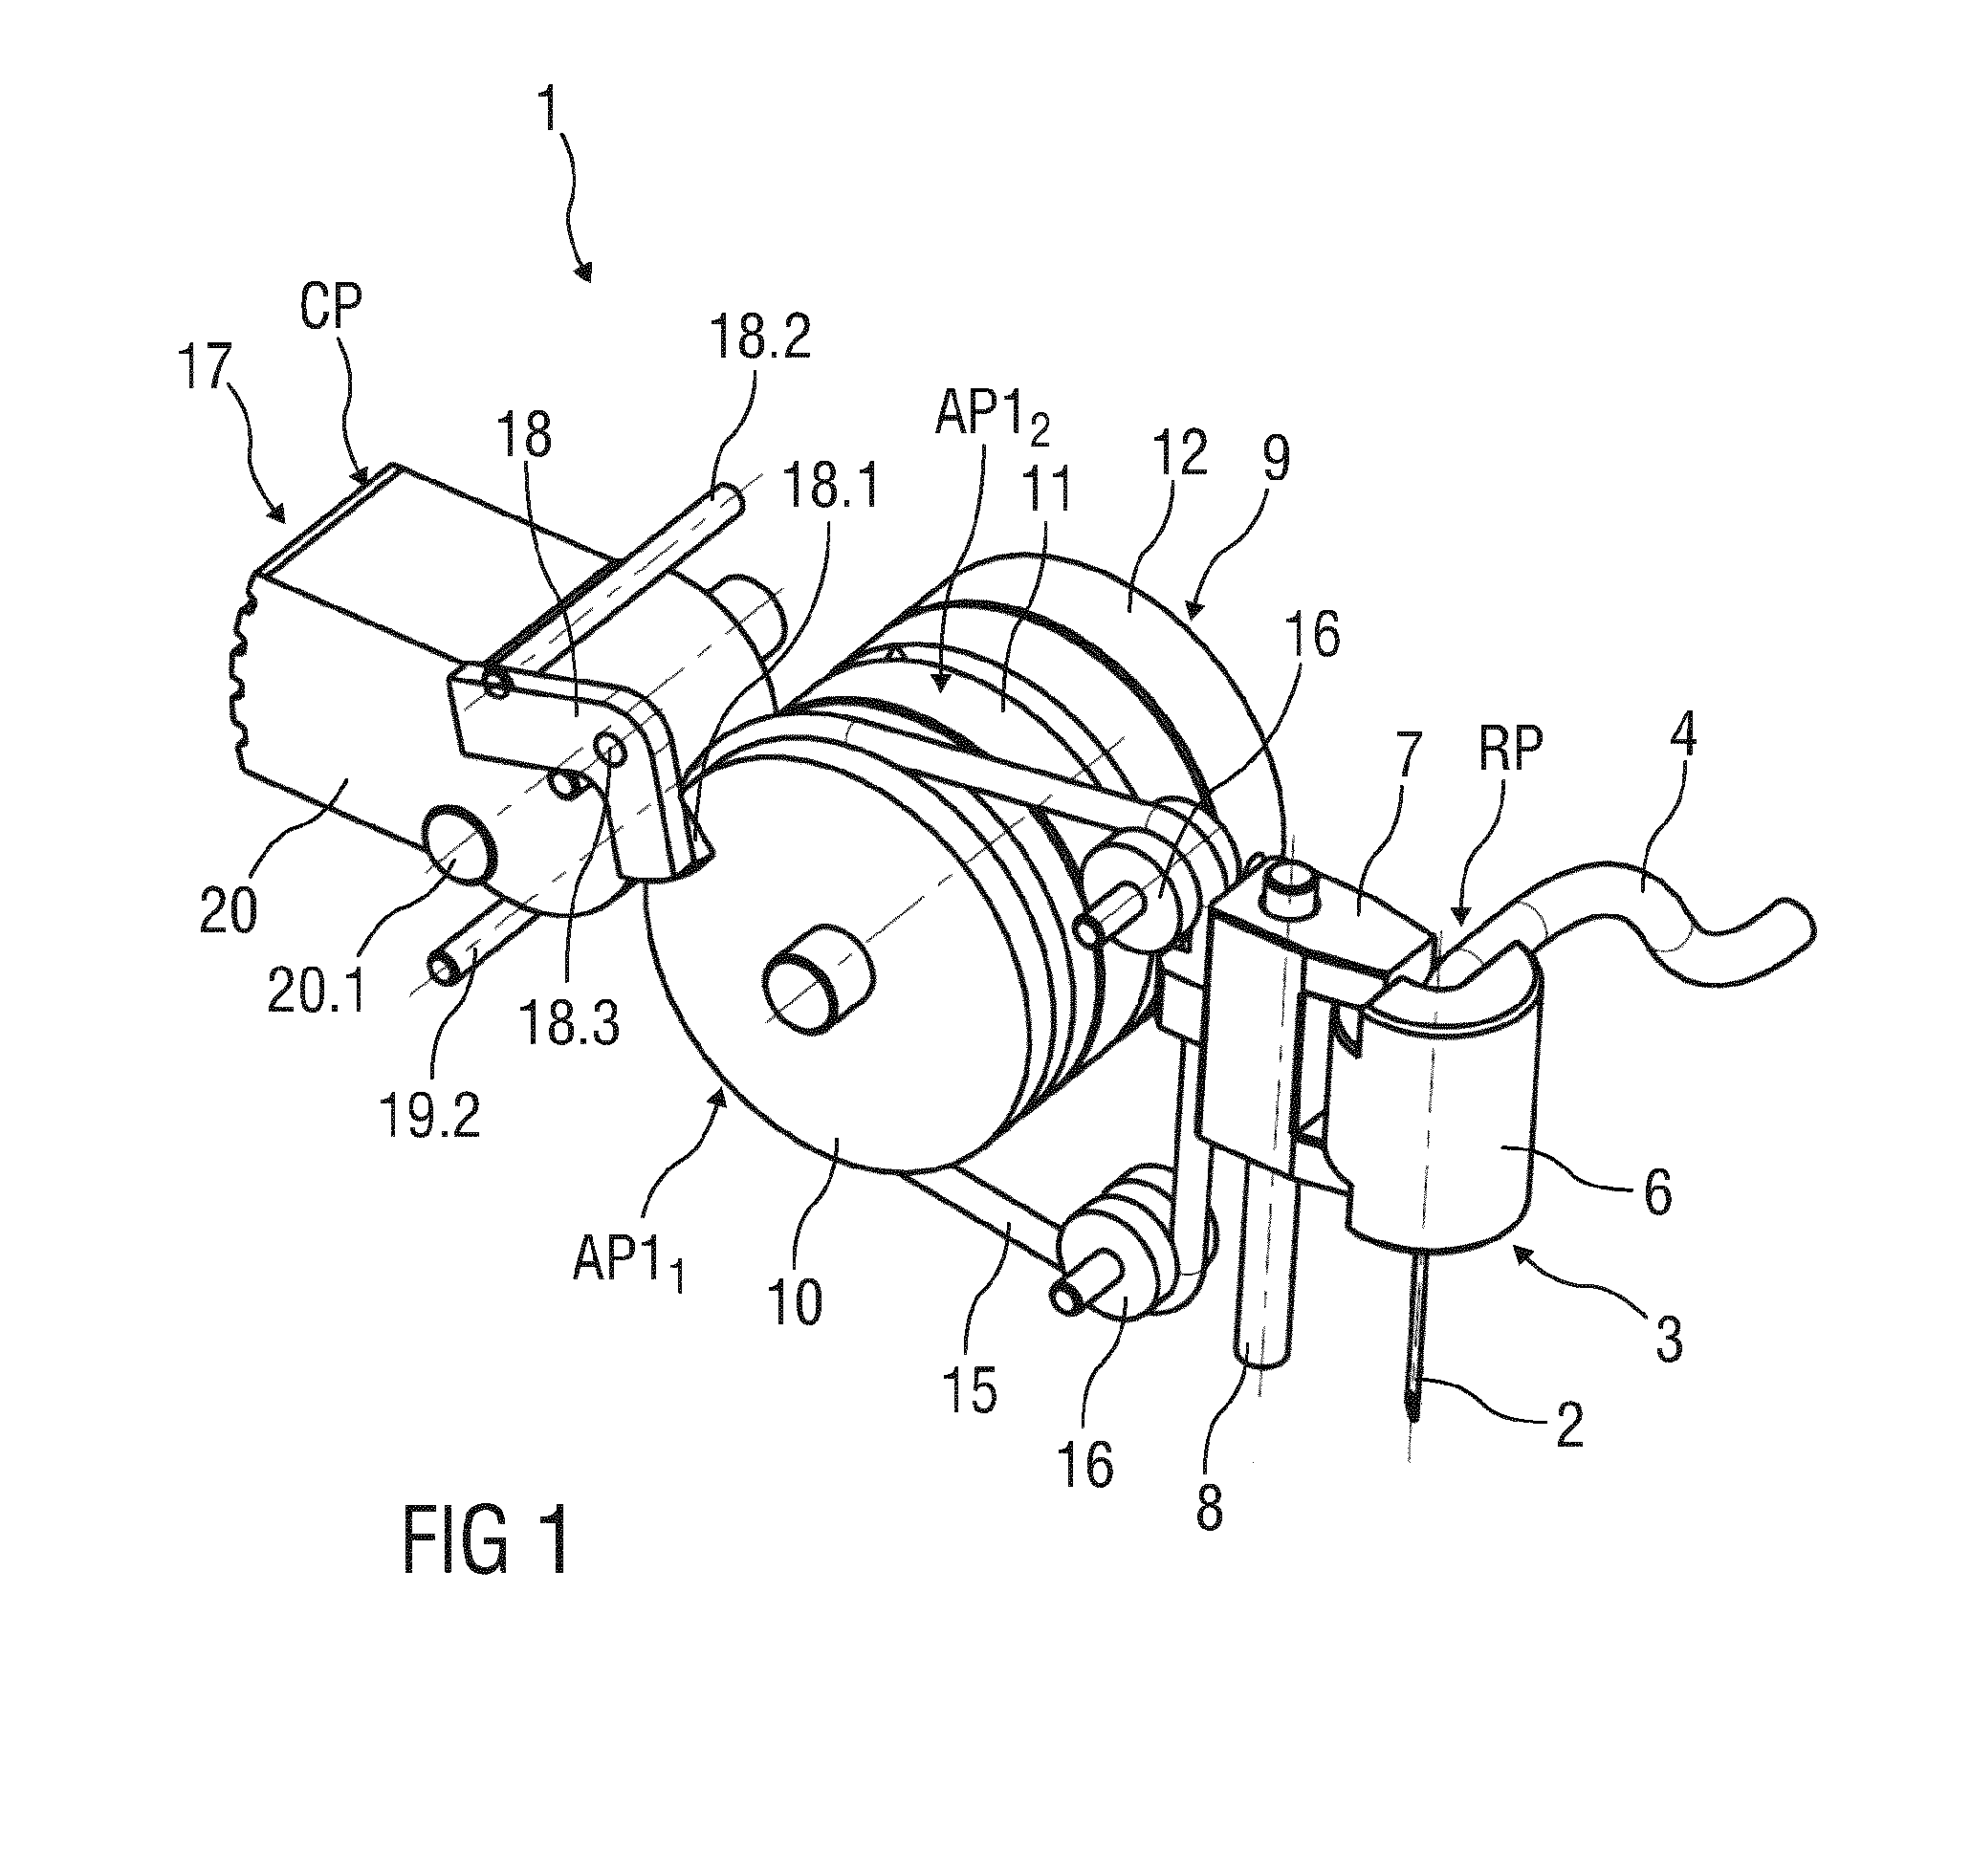 Needle insertion and retraction arrangment with manually triggered, spring-loaded drive mechanism